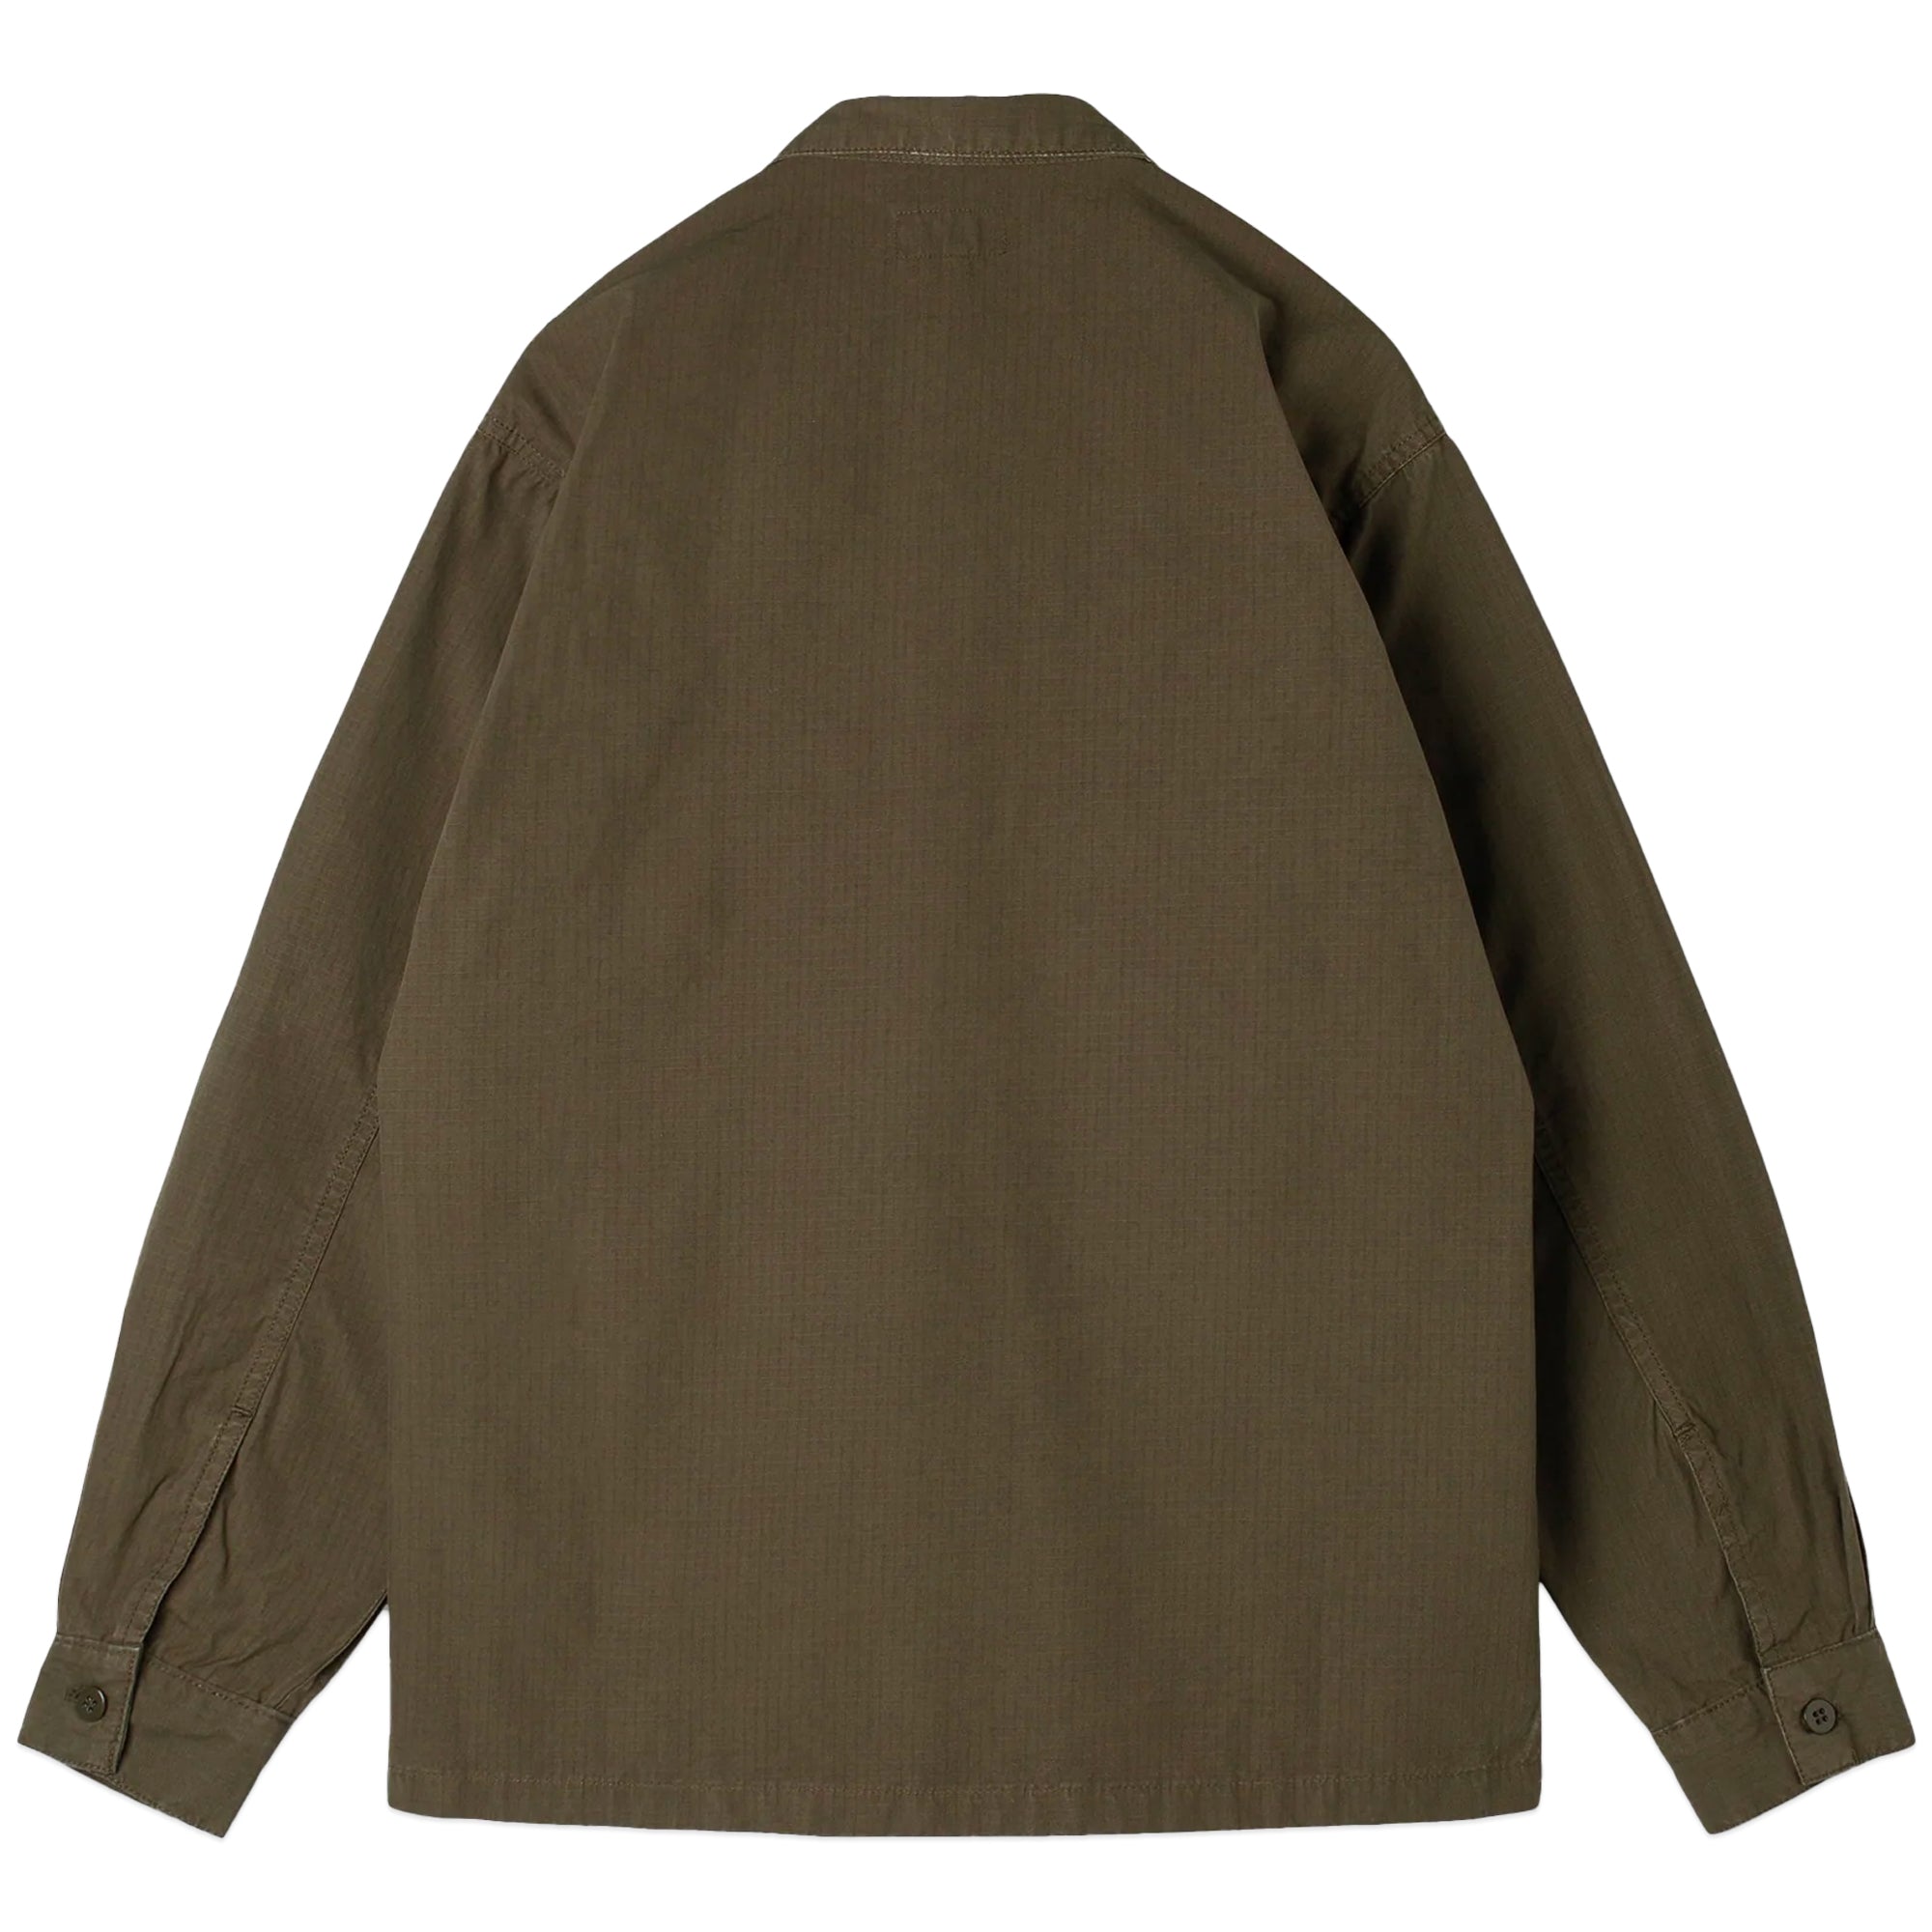 Stan Ray CPO Shirt - Olive Ripstop